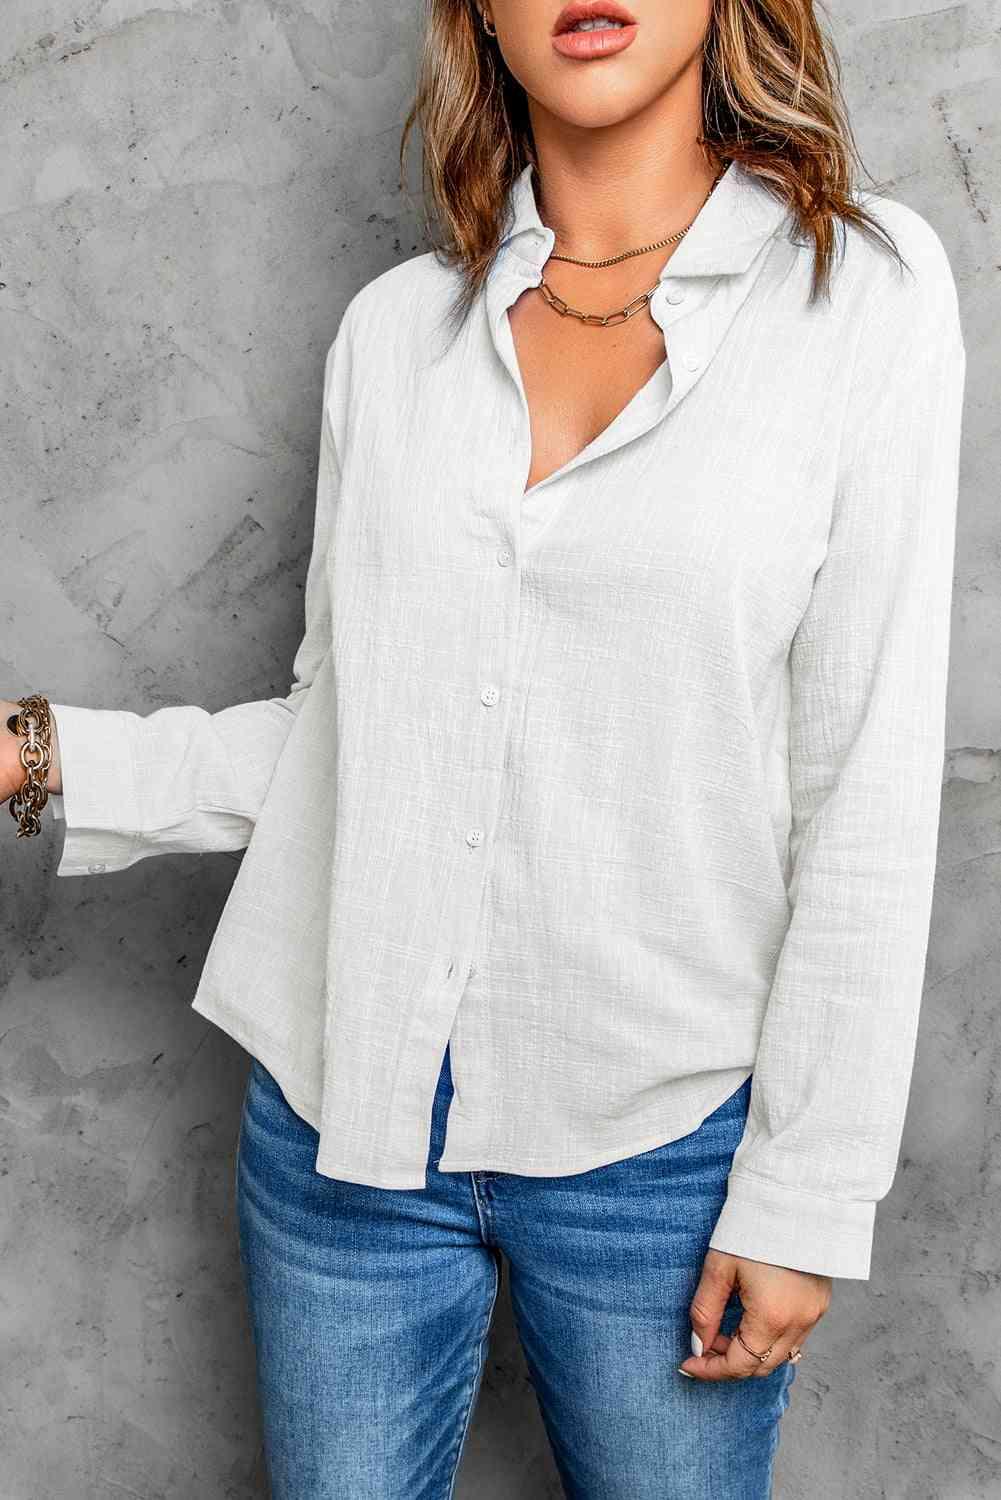 a woman wearing a white shirt and jeans